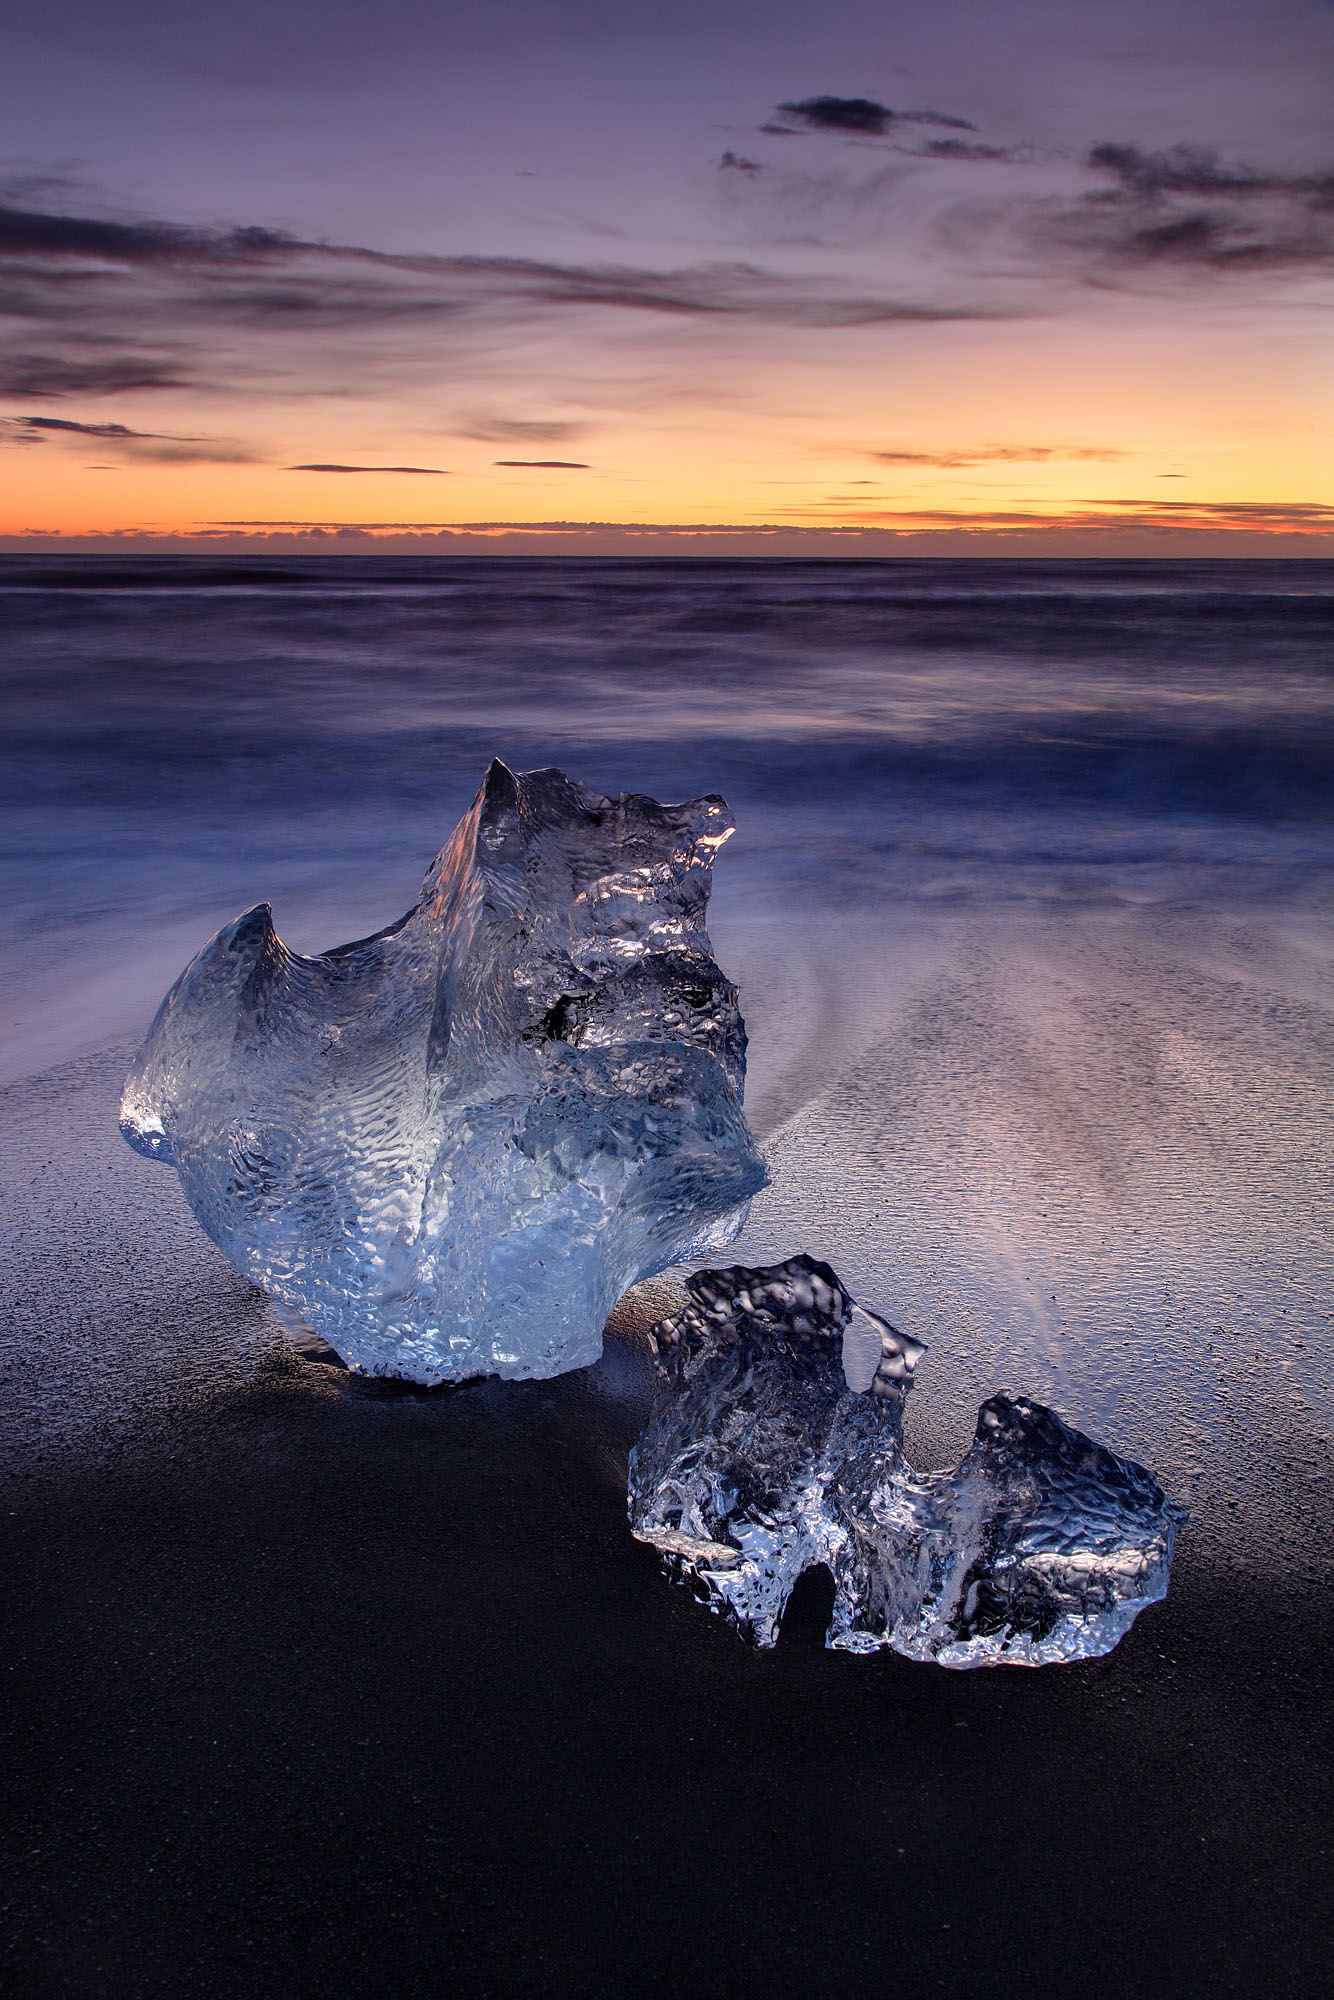 Two small icebergs are beached at low tide on the Jökulsárlón Strandur coastline in wintertime Iceland.